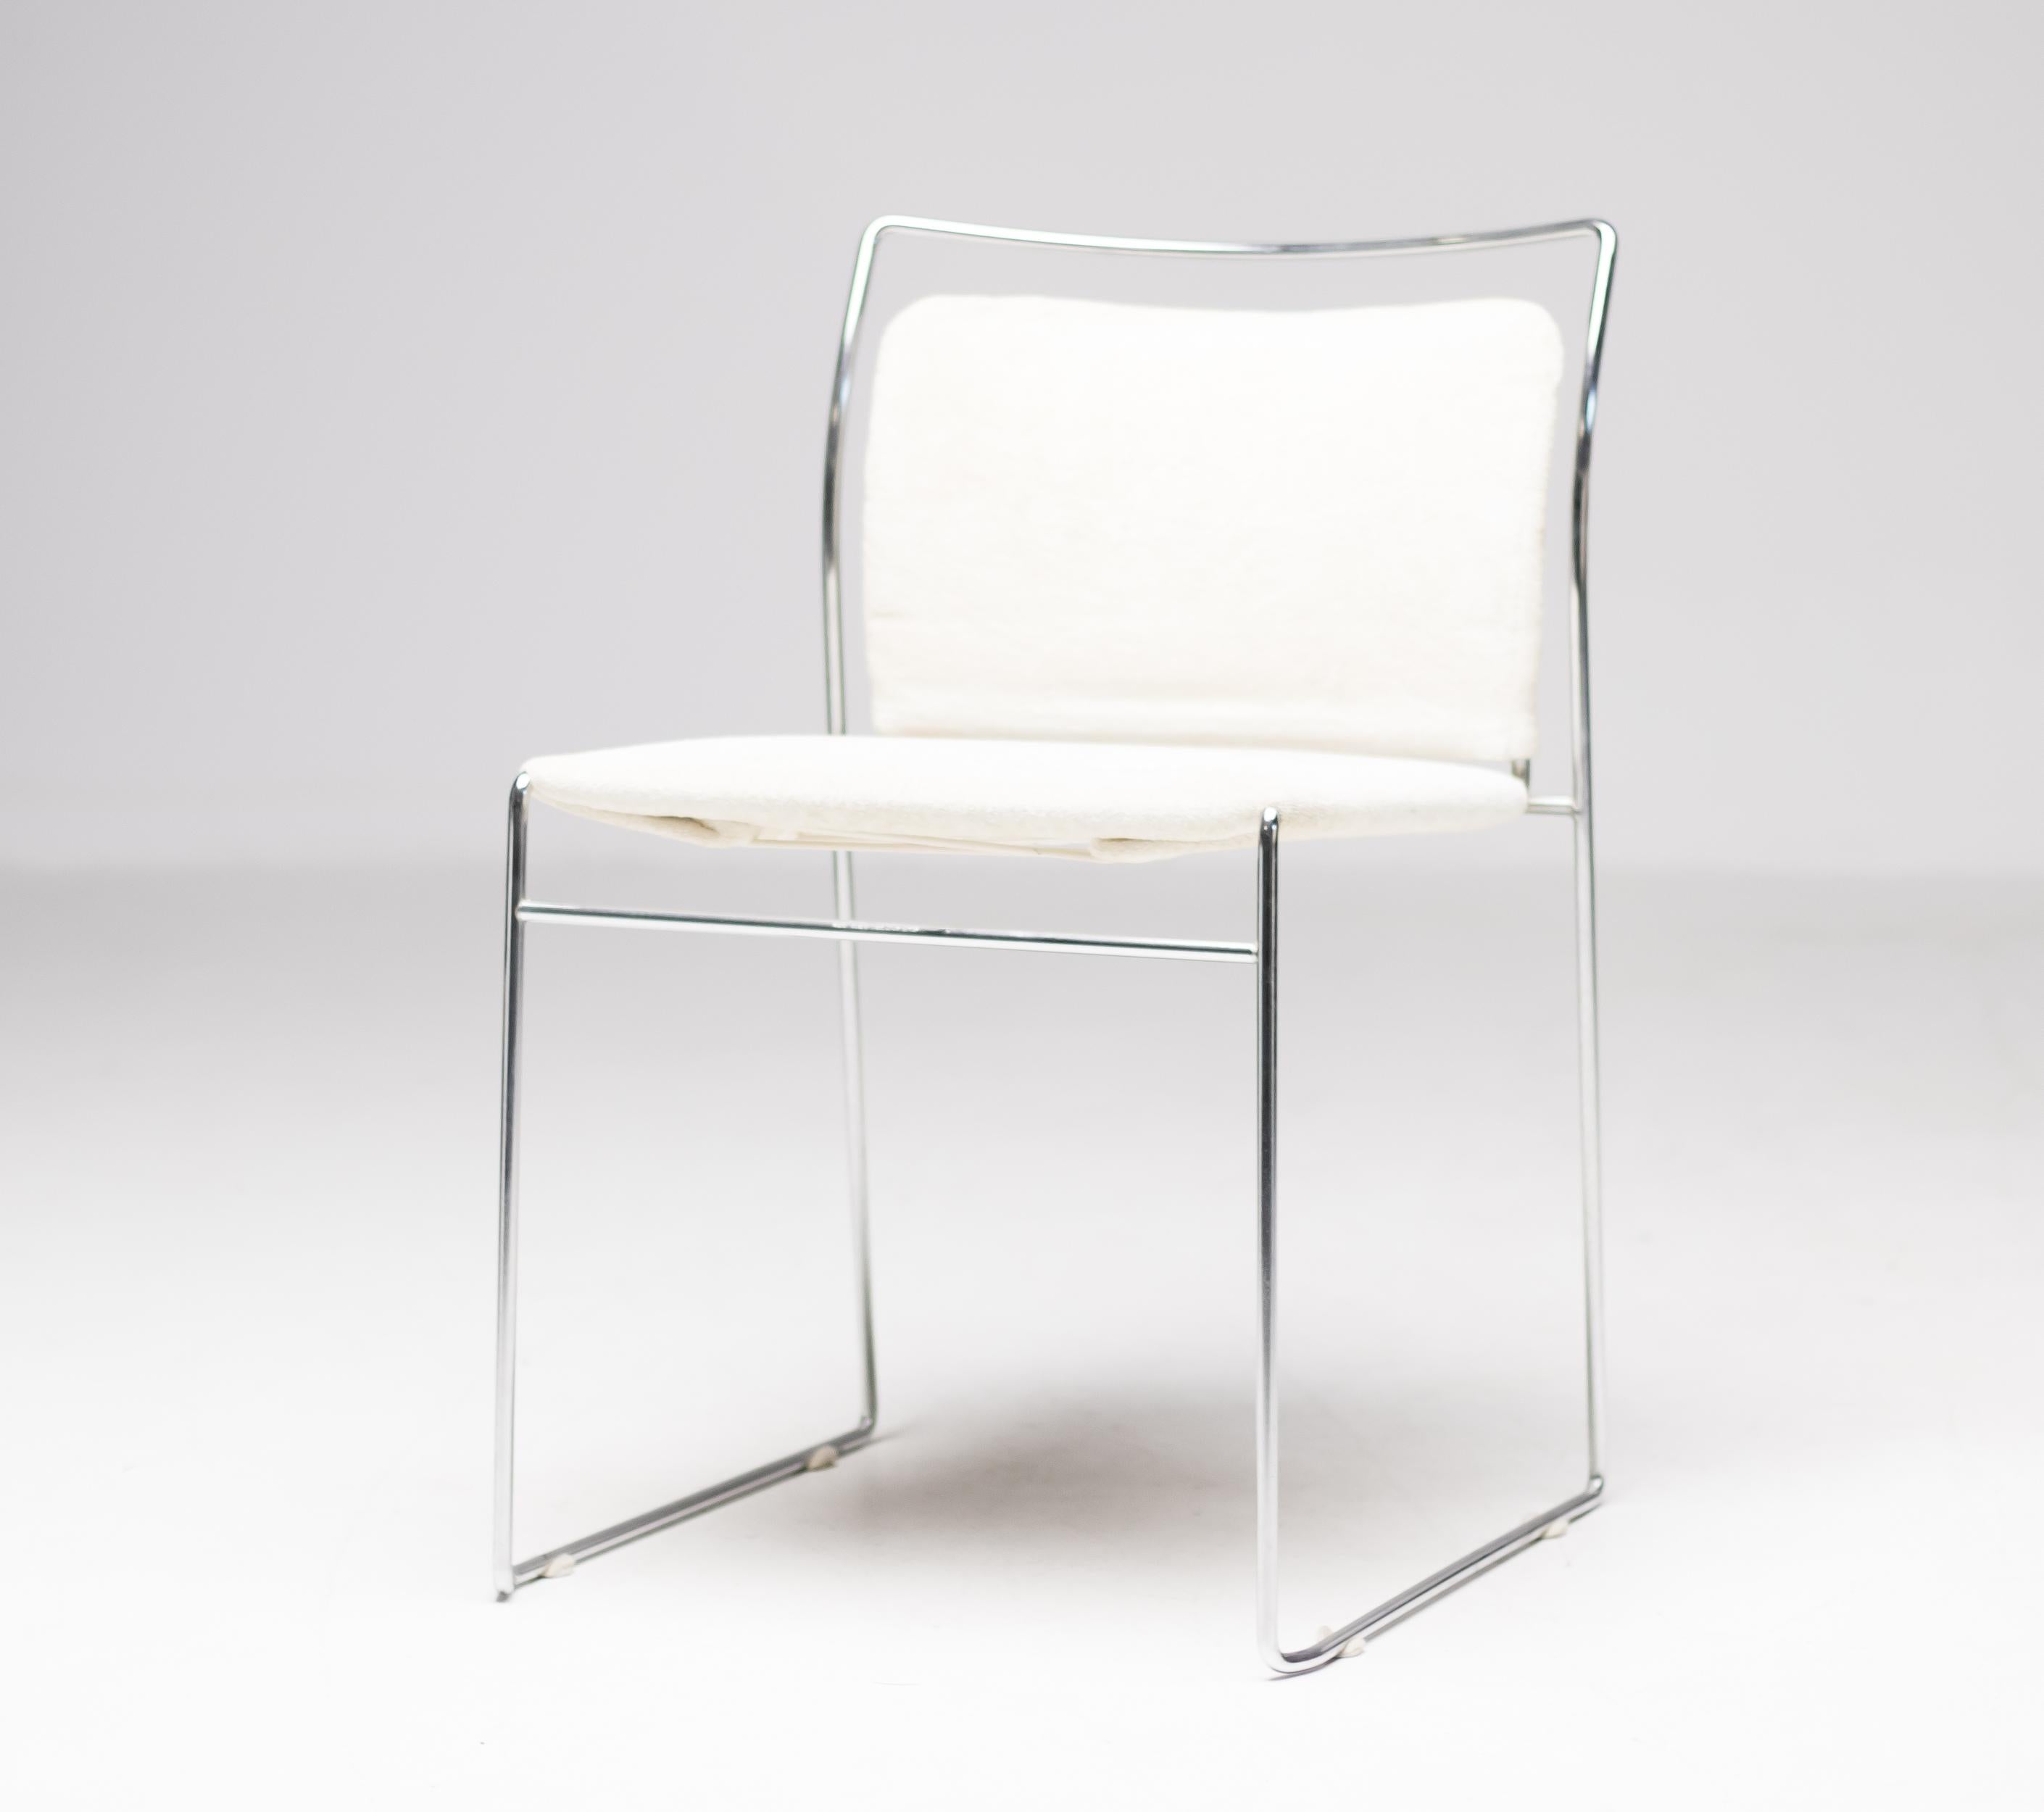 The Tulu chair was designed by the Japanese designer Kazuhide Takahama for Simon International in 1966. 
The Tulu is one of the very first models that paved the way for the use of chrome-plated steel rod. The steel rod makes it possible to produce